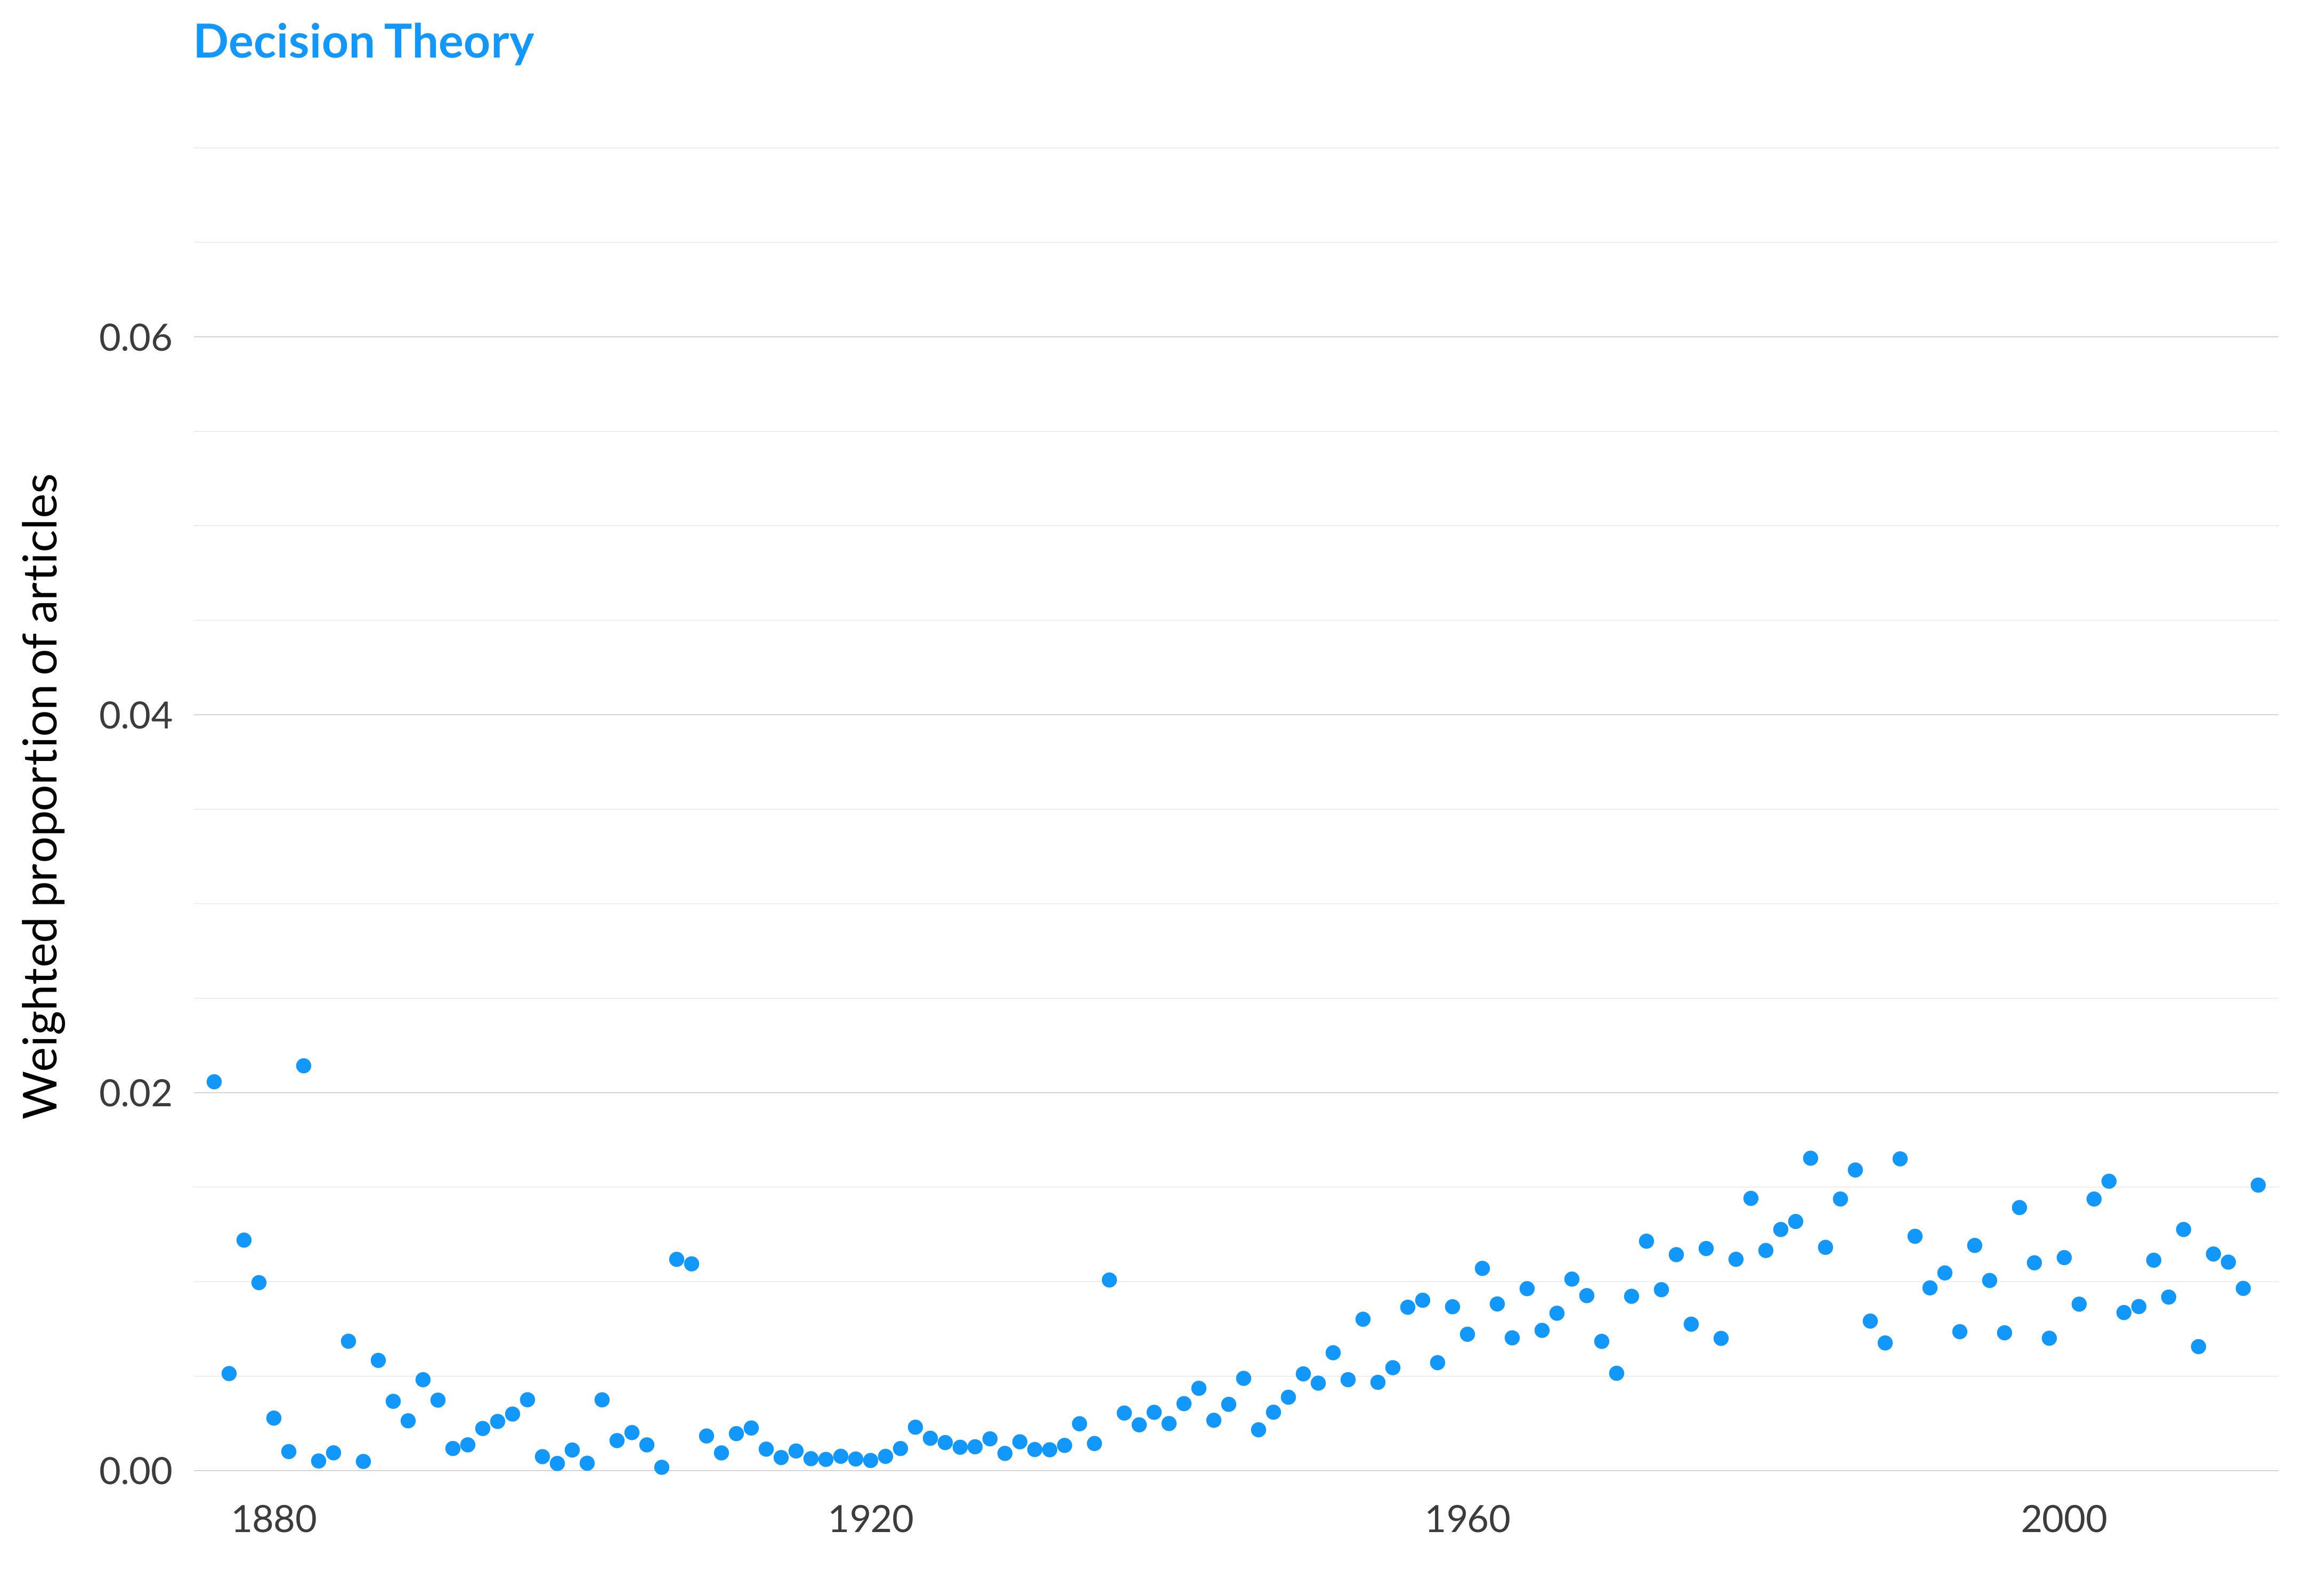 A scatterplot showing which proportion of articles each year are in the decision theorytopic. The x-axis shows the year, the y-axis measures the proportion of articles each year in this topic. There is one dot per year. The highest value is in 1882 when 2.1% of articles were in this topic. The lowest value is in 1906 when 0.0% of articles were in this topic. The full table that provides the data for this graph is available in Table A.57 in Appendix A.